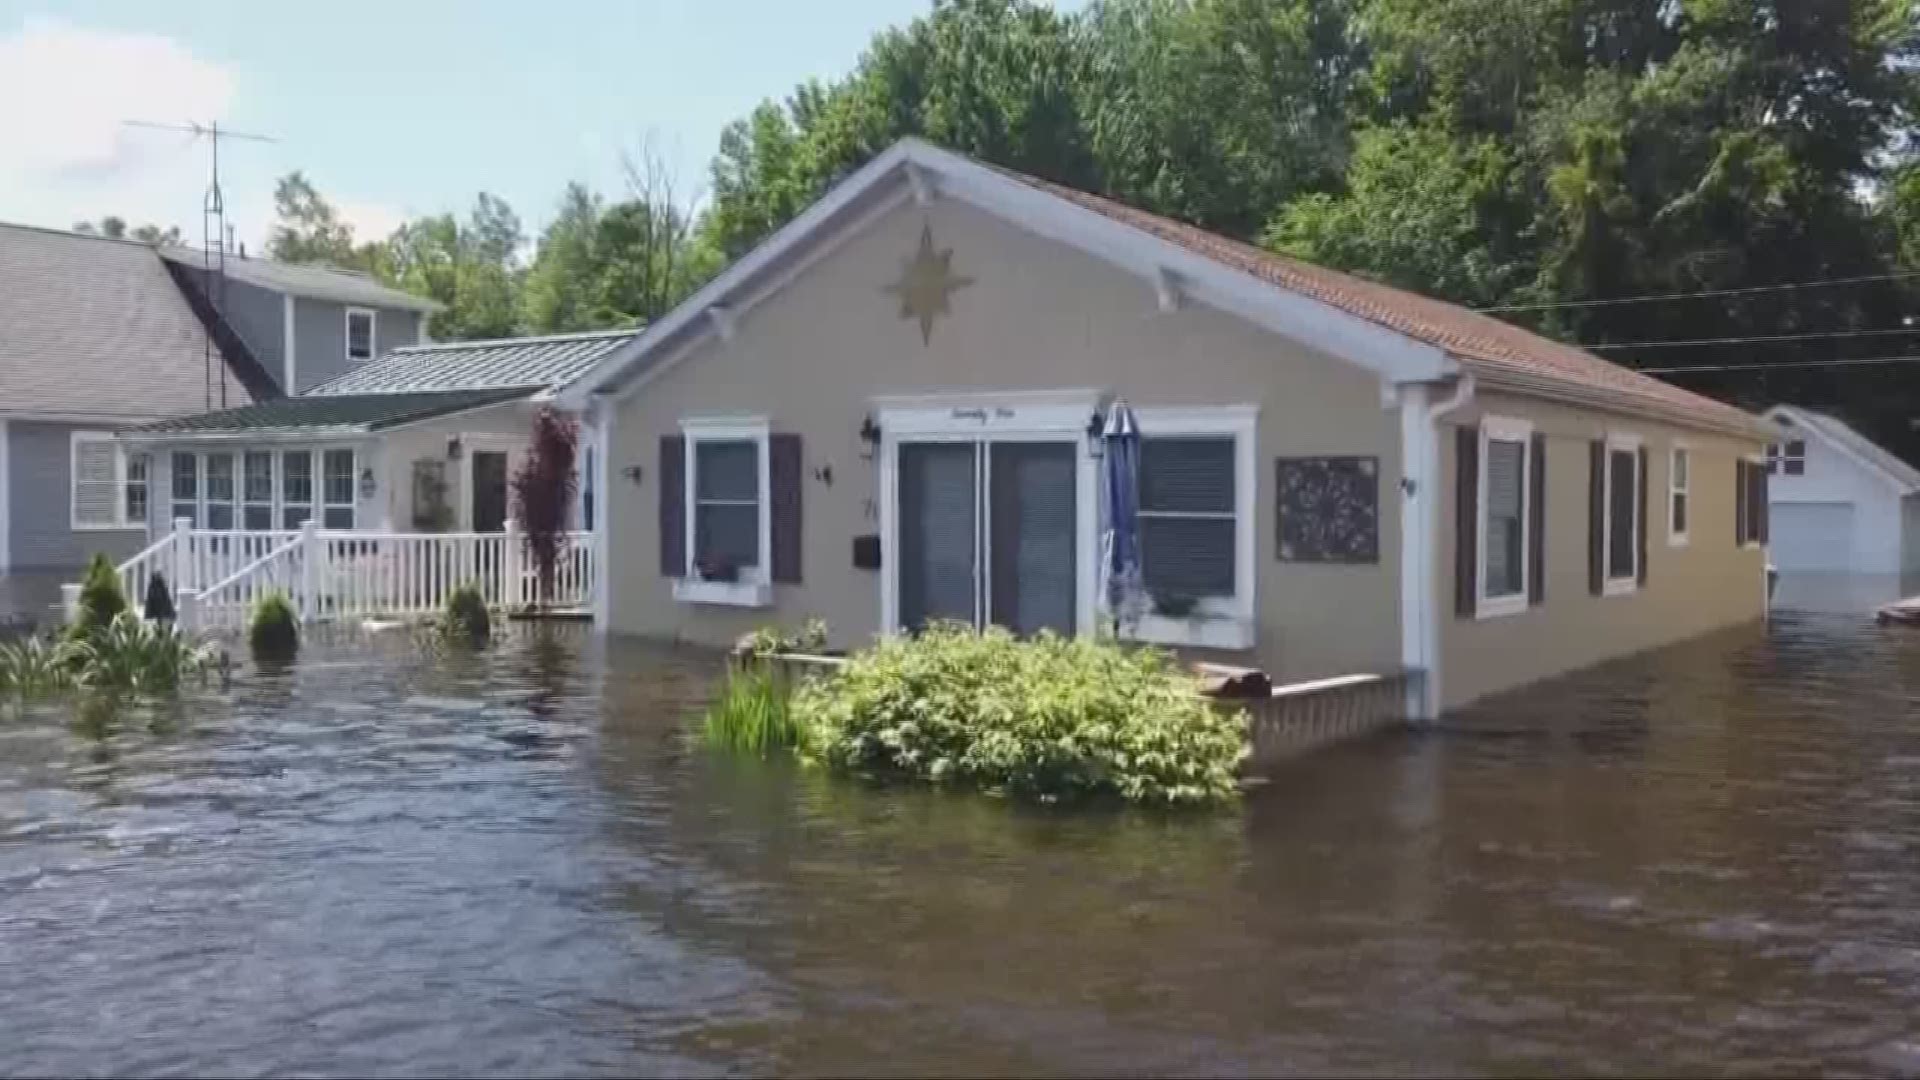 June 24, 2019: After a devastating flood, some people living along Luna Lake fear their homes may be a total loss. Dozens of affected homeowners spent their Sunday removing floors, ripping out insulation and throwing out years of memories. Earlier this week, rising water spilled into more than 20 homes, causing widespread damage.